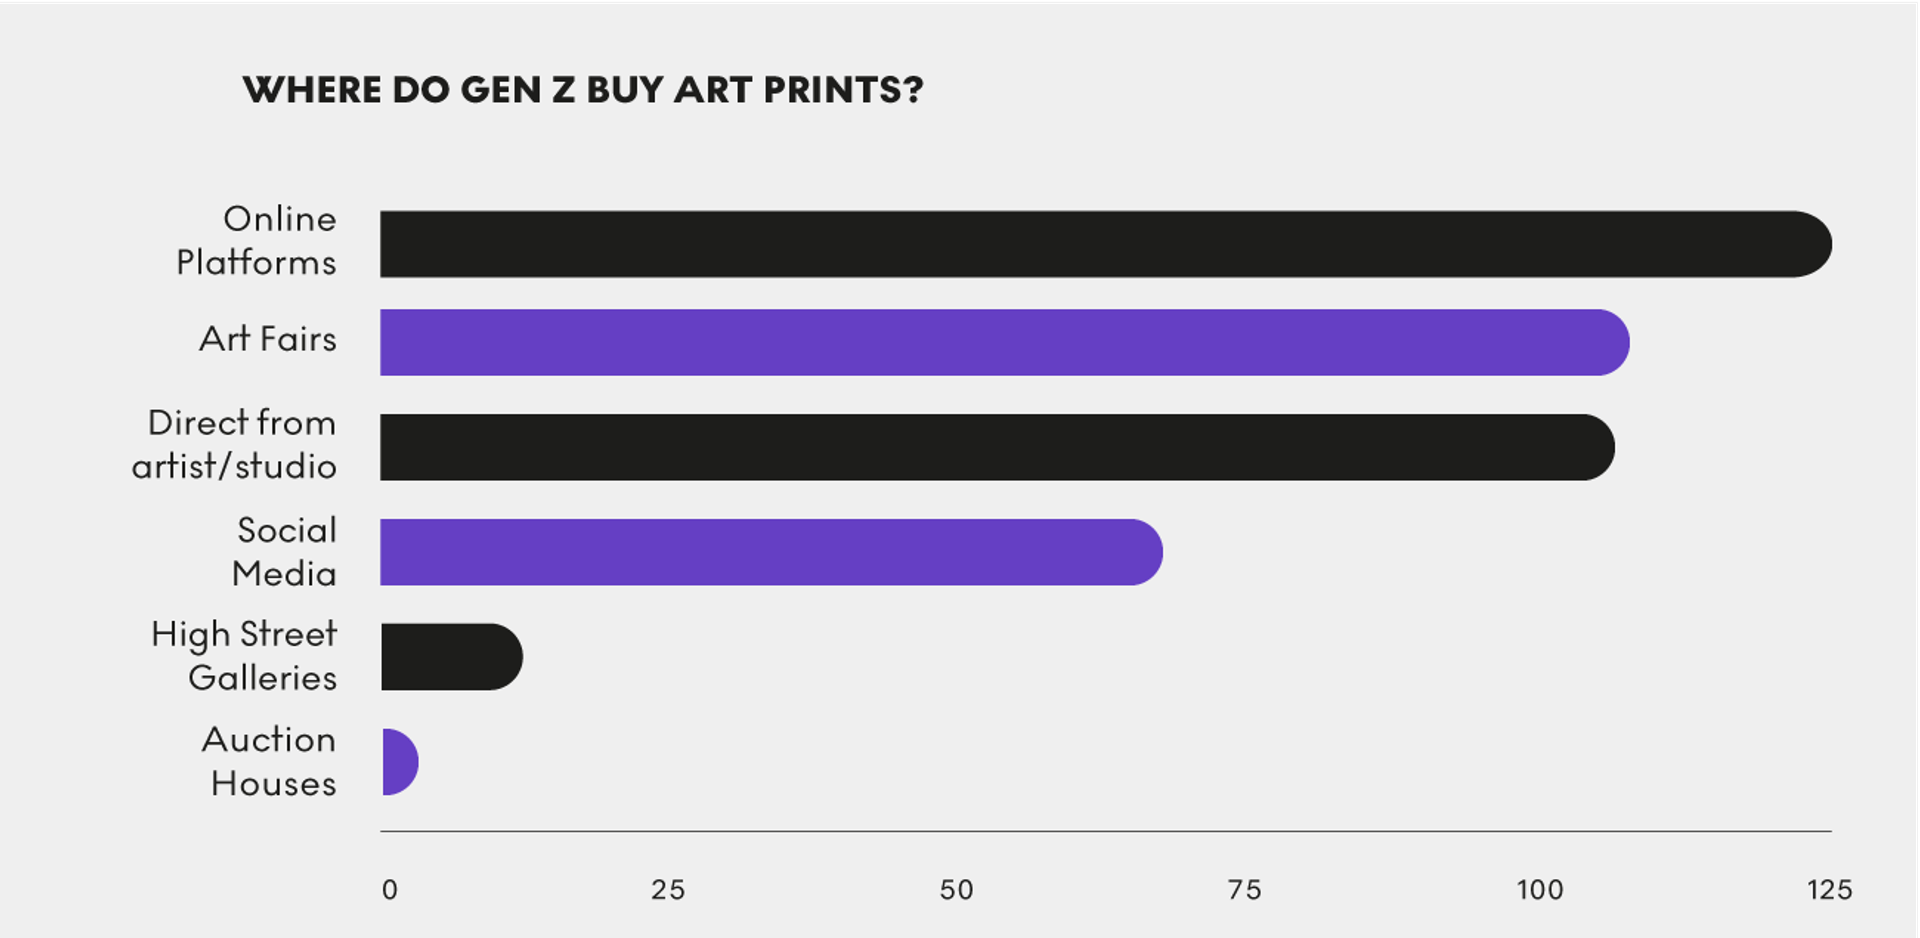 A graph showing where Gen Z buy art prints from